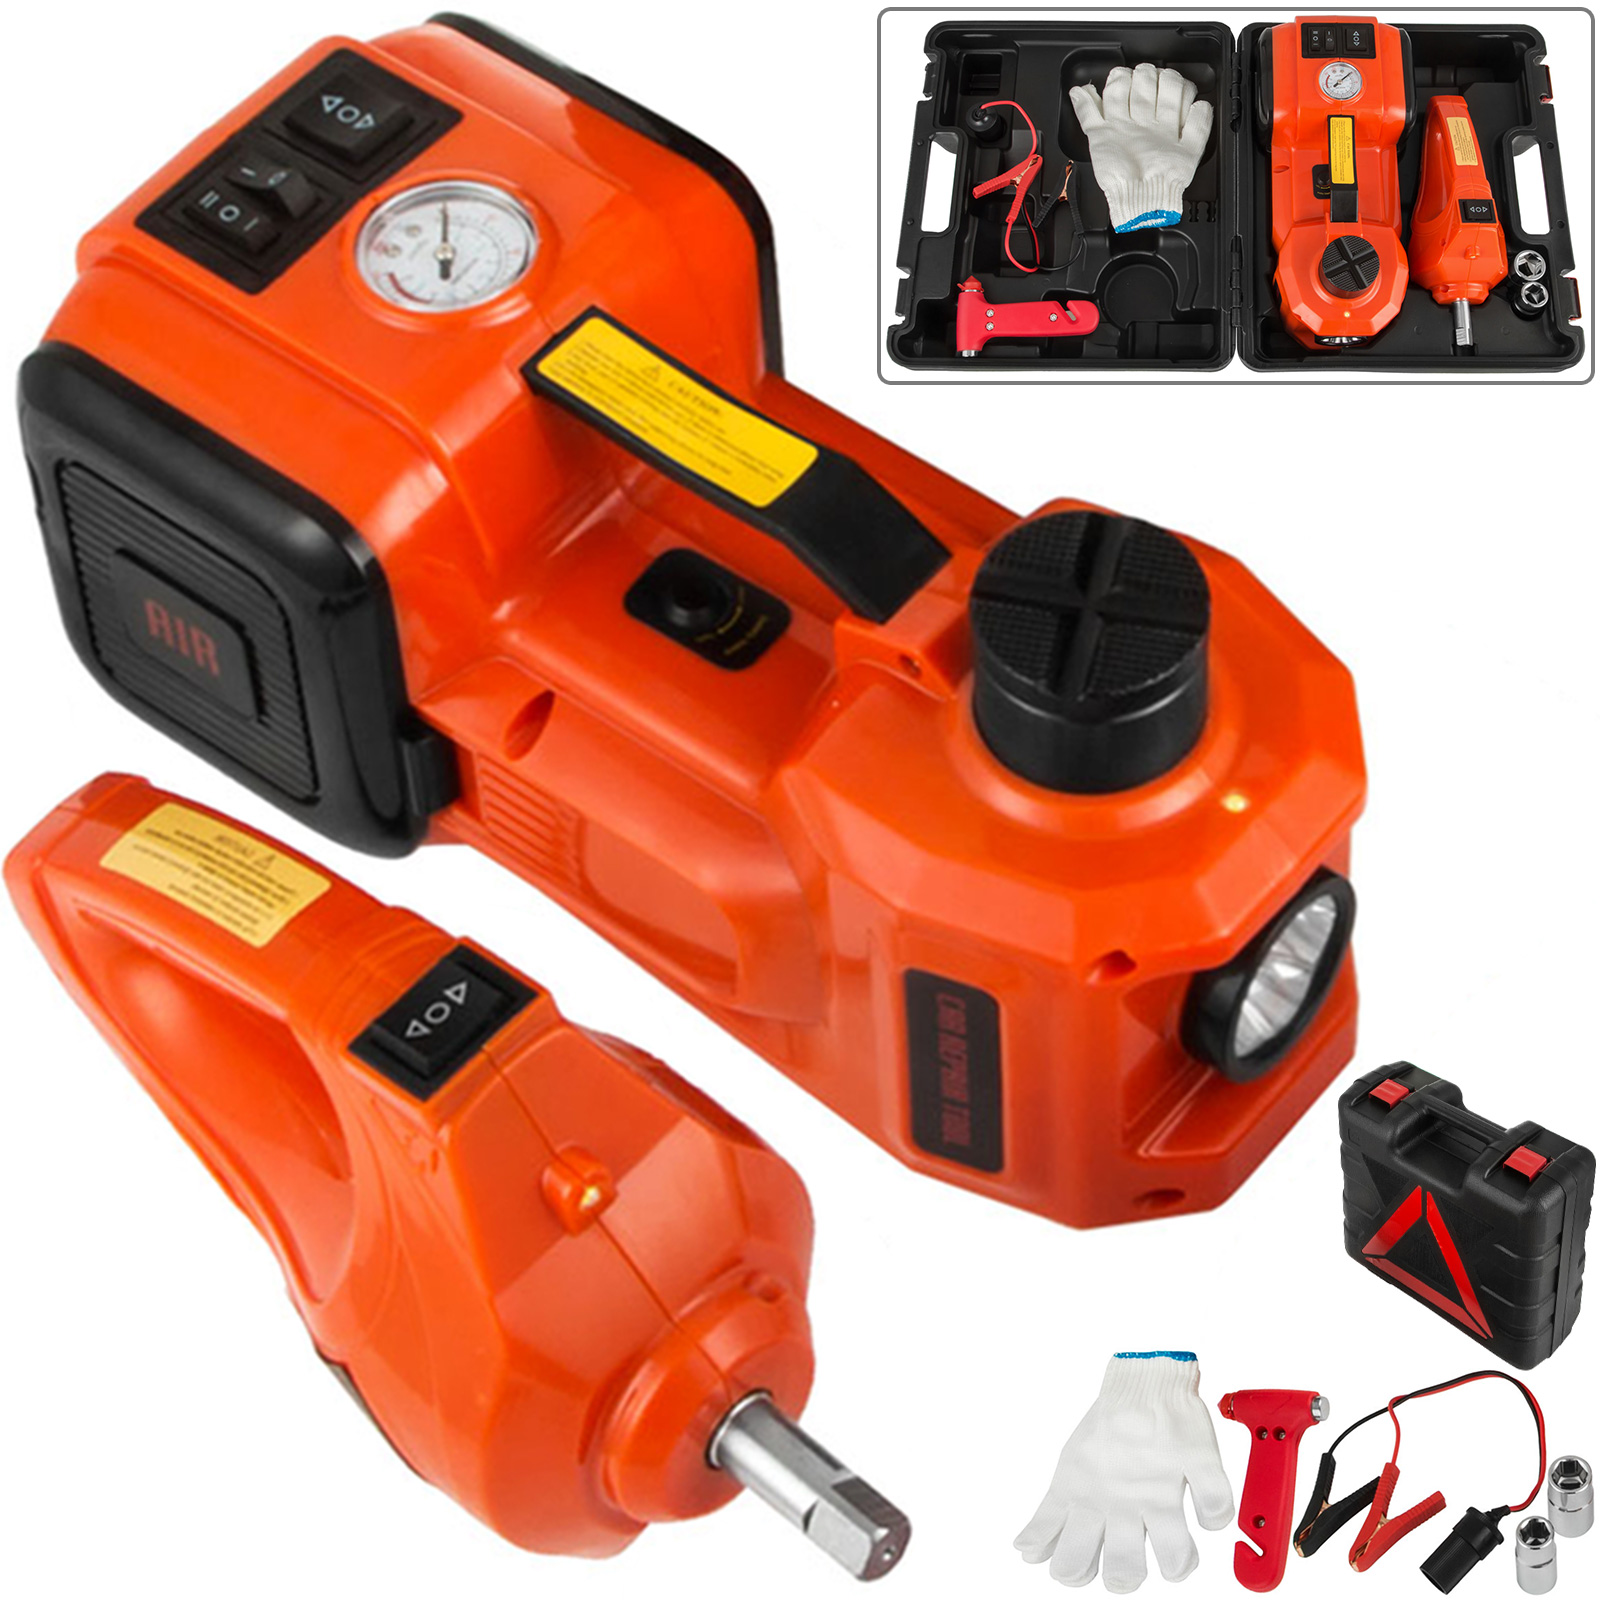 3 In 1 12v Dc 3t Electric Hydraulic Floor Jack Lift Set With. Impact Wrench от Vevor Many GEOs